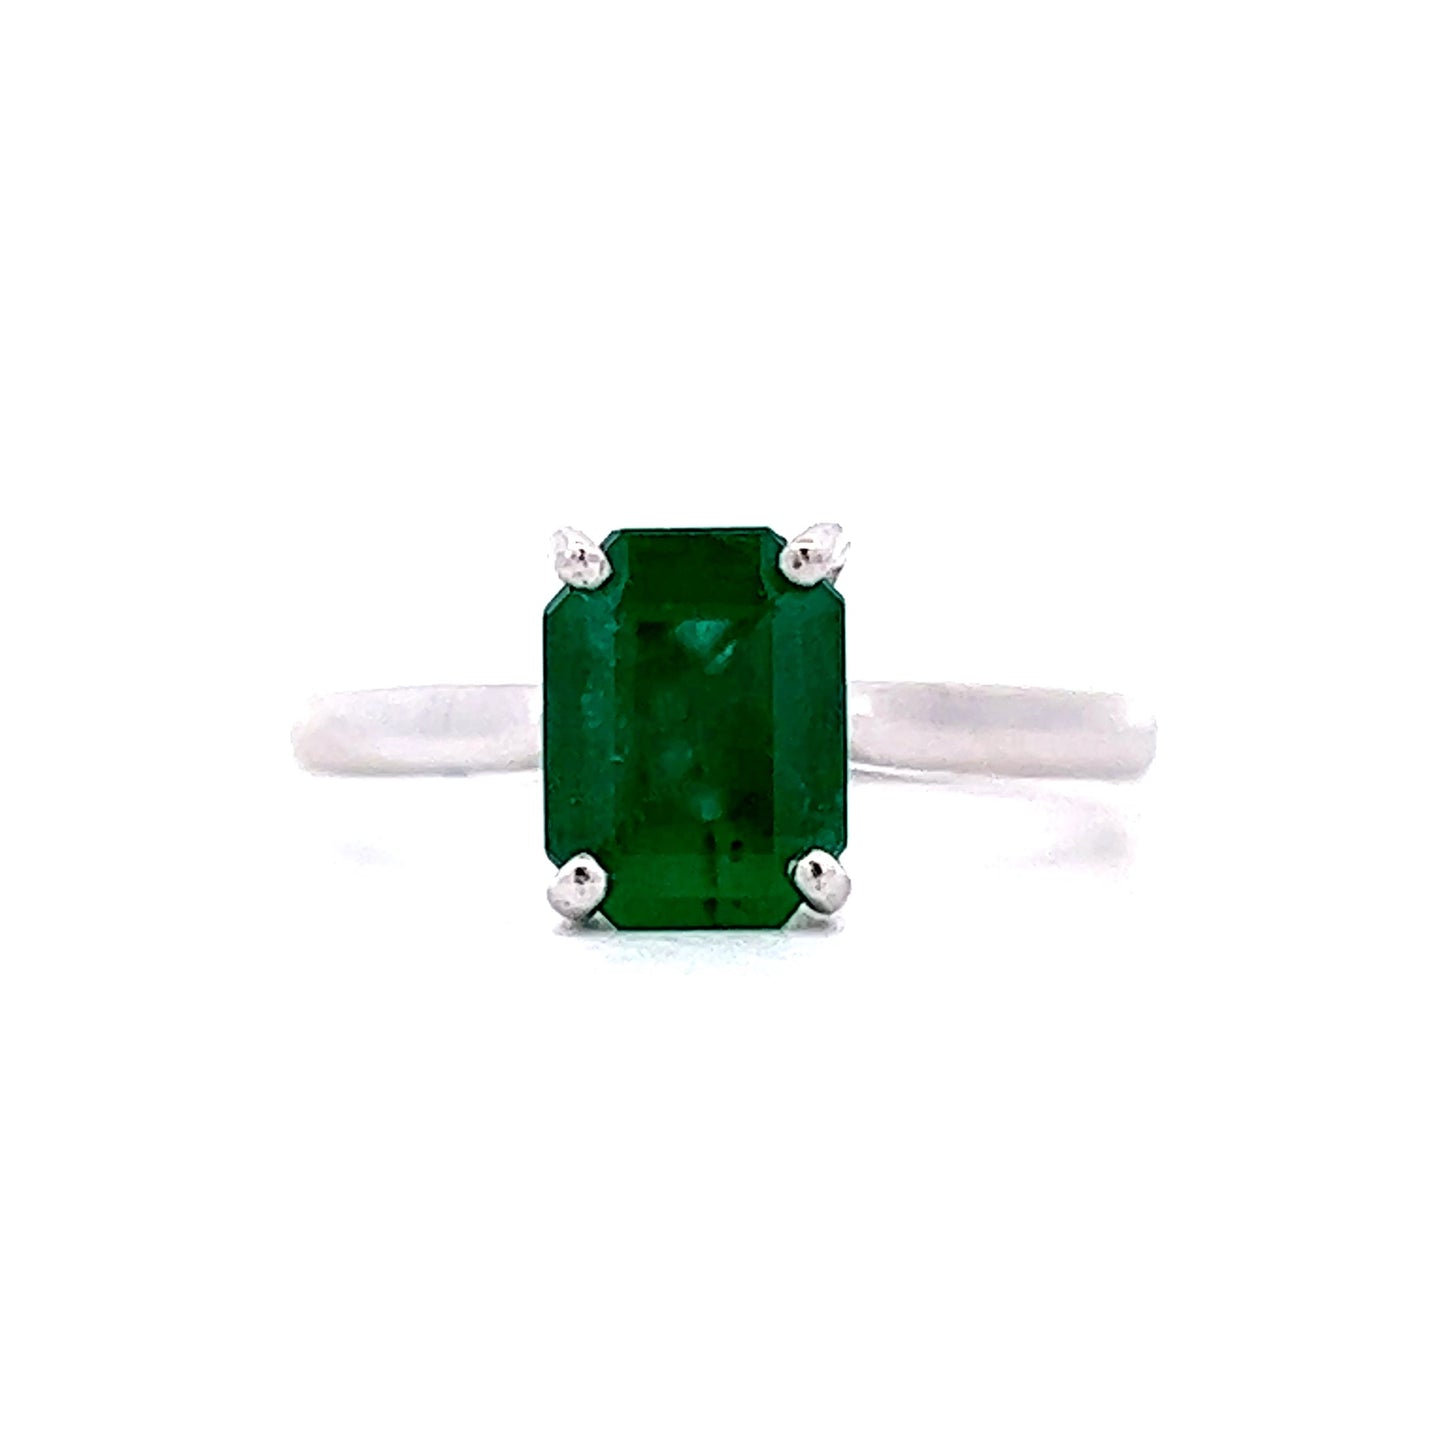 Solitaire Emerald Engagement Ring in 14k White Gold